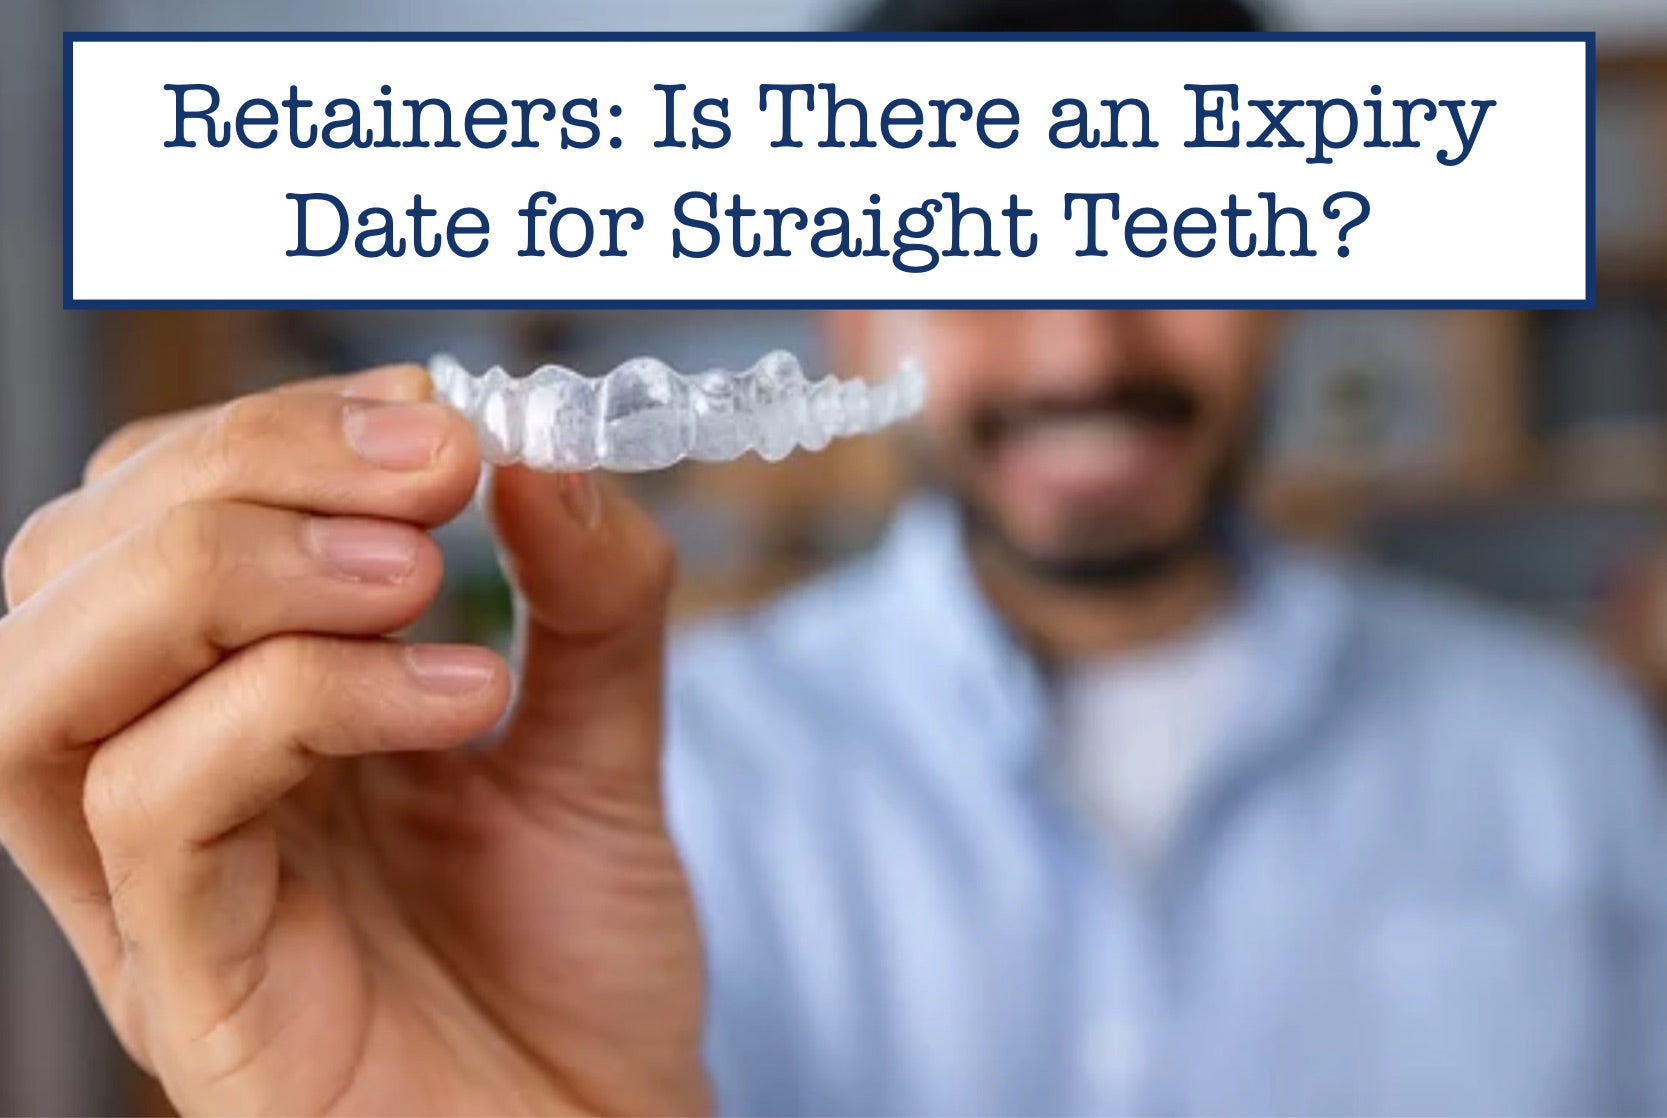 Retainers: Is There an Expiry Date for Straight Teeth?